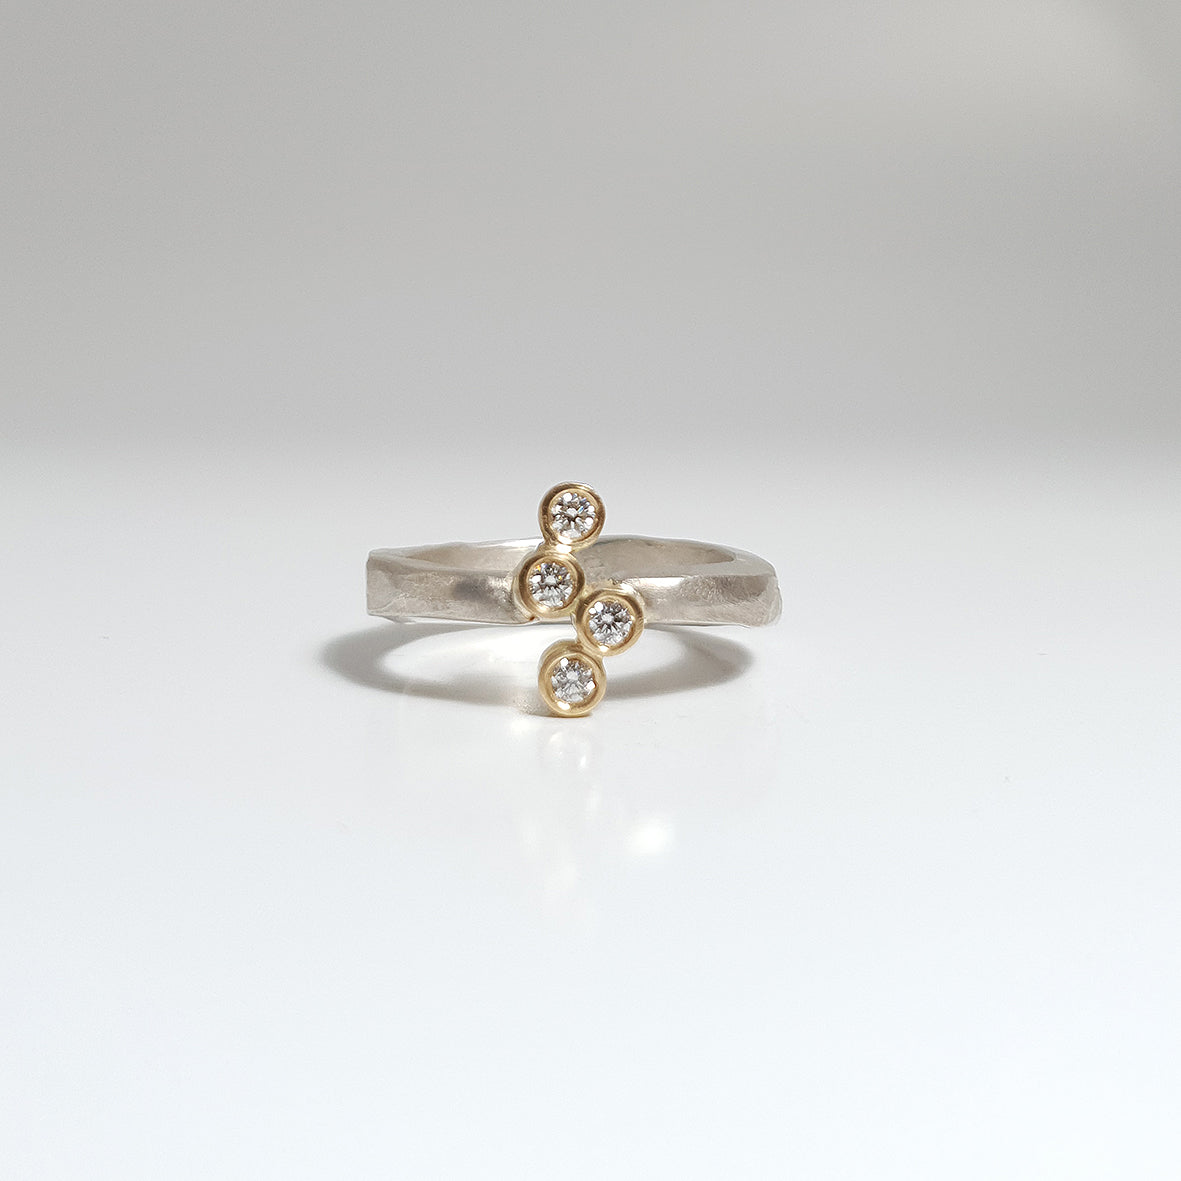 Ring from the forJa collection.